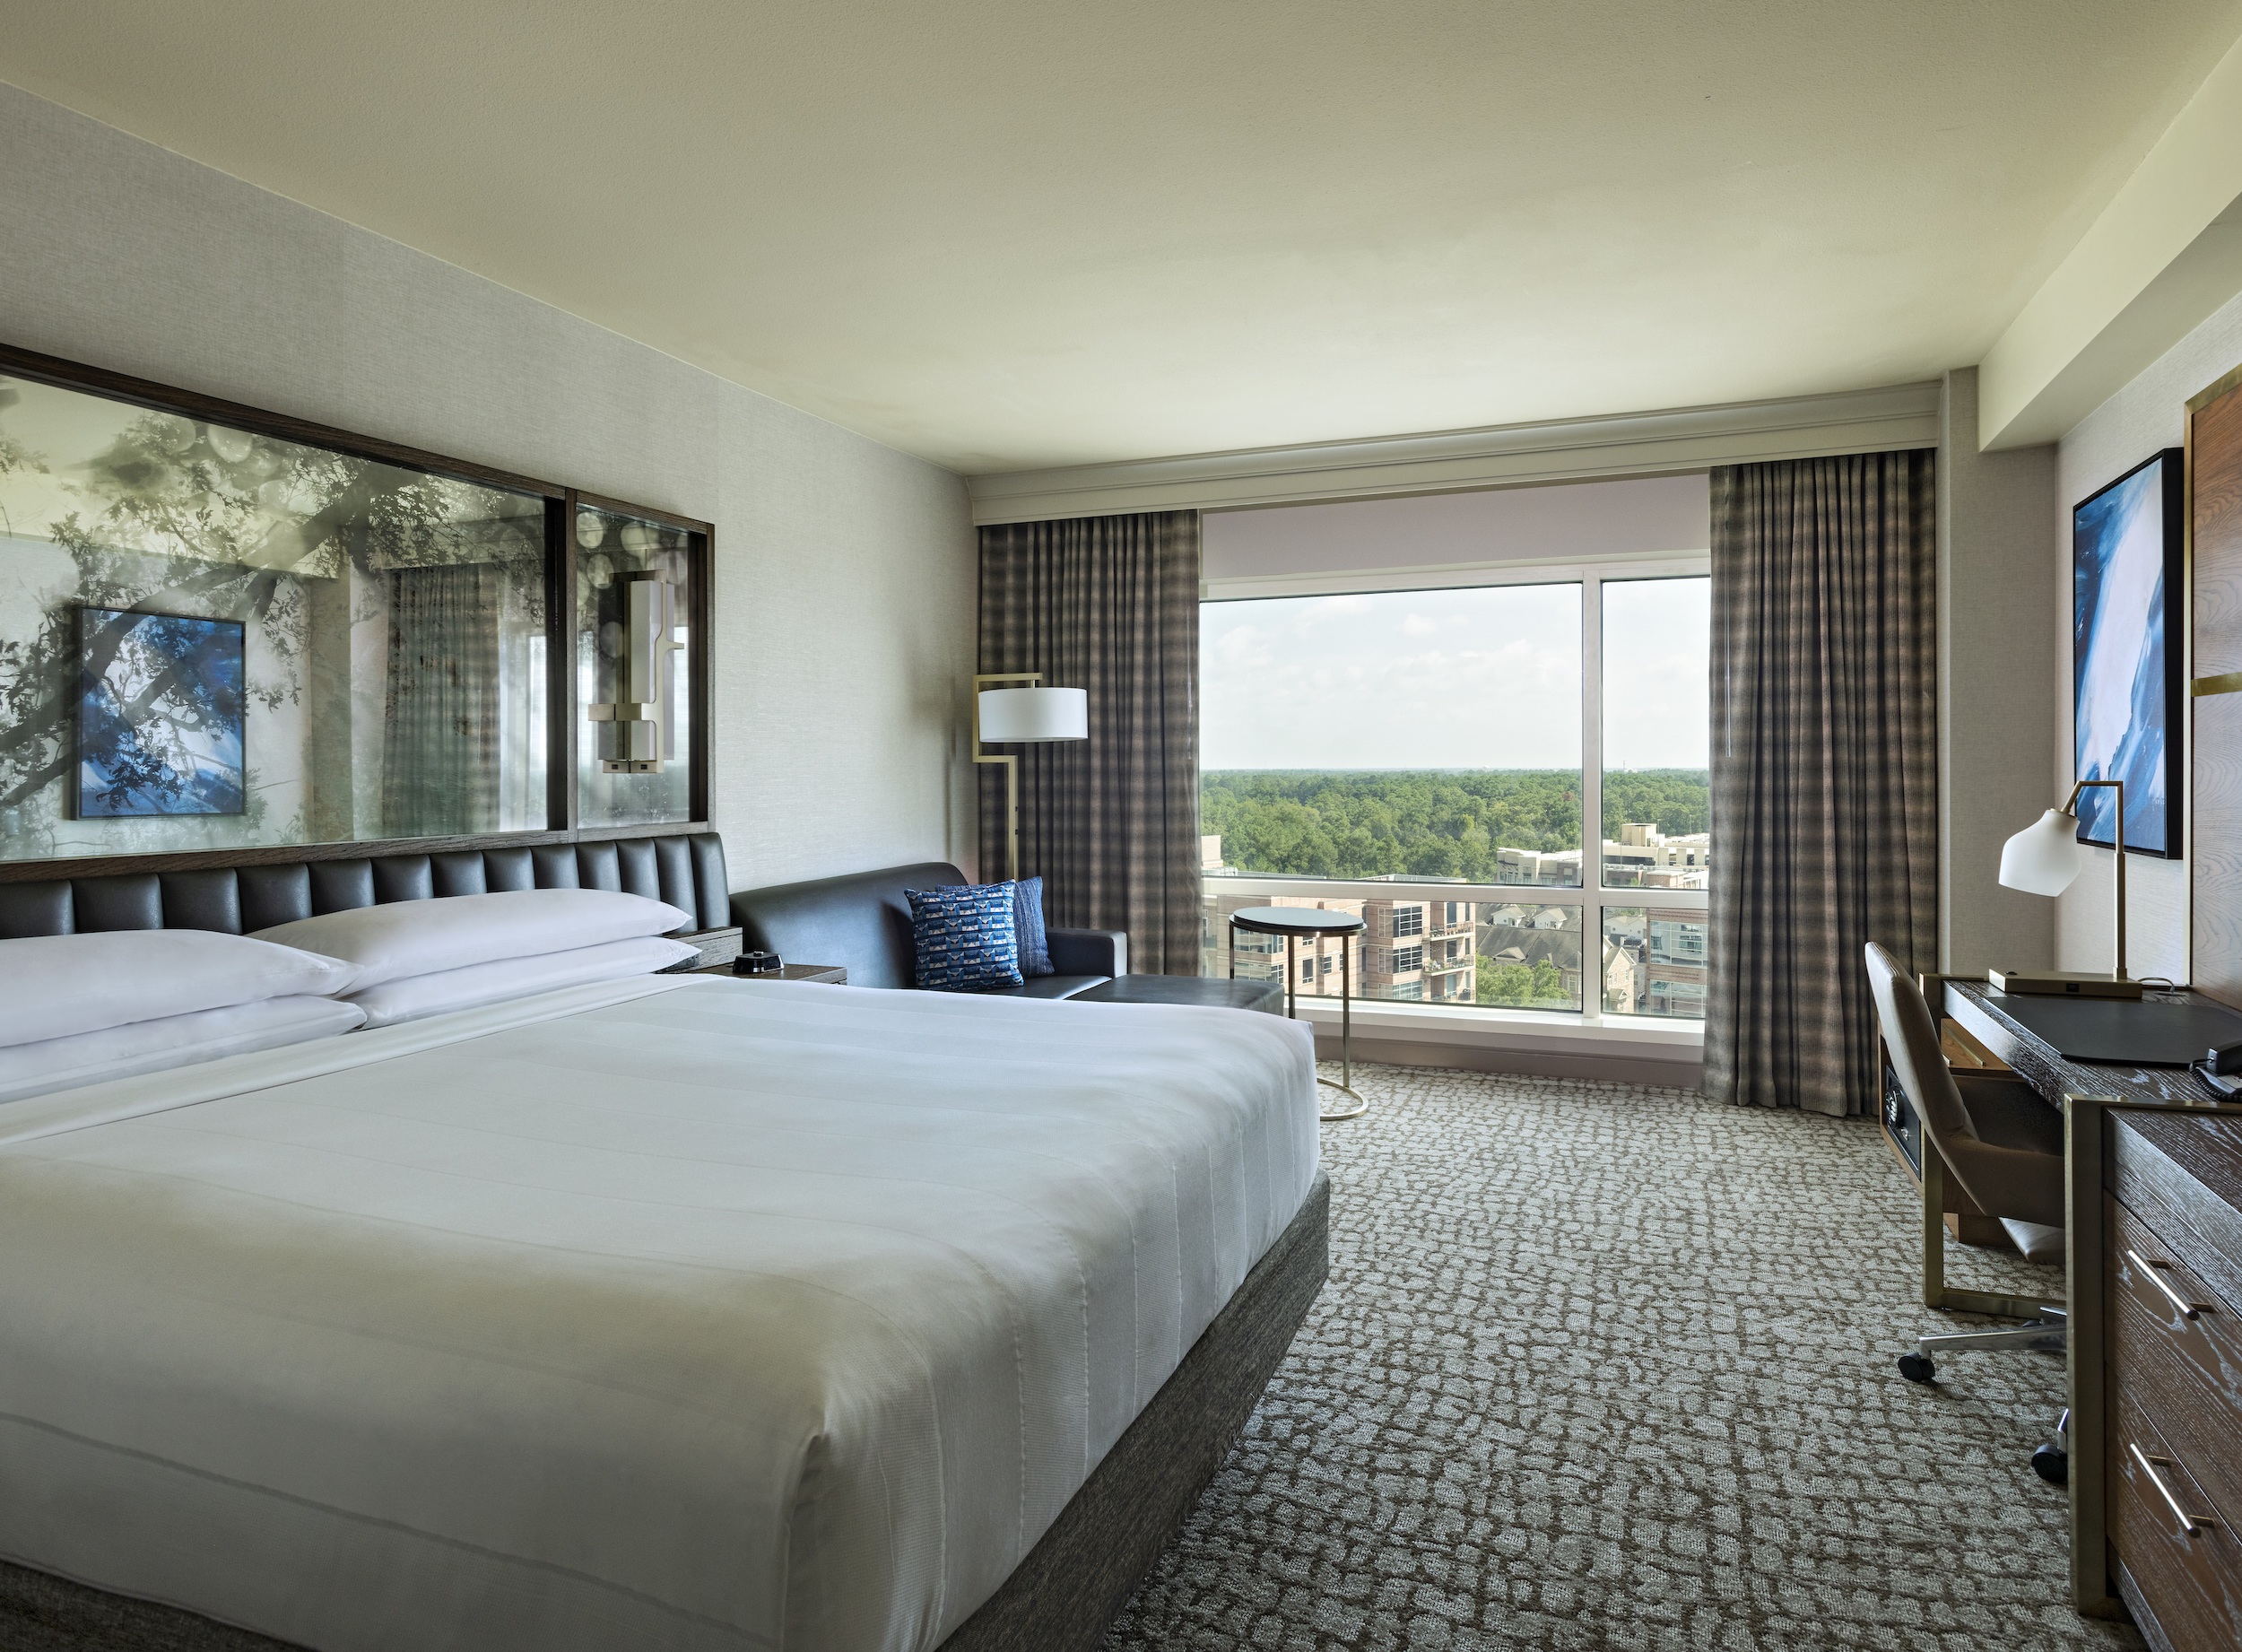 One of the king hotel rooms at The Woodlands Waterway Marriott Hotel, which has beautiful waterfront views.